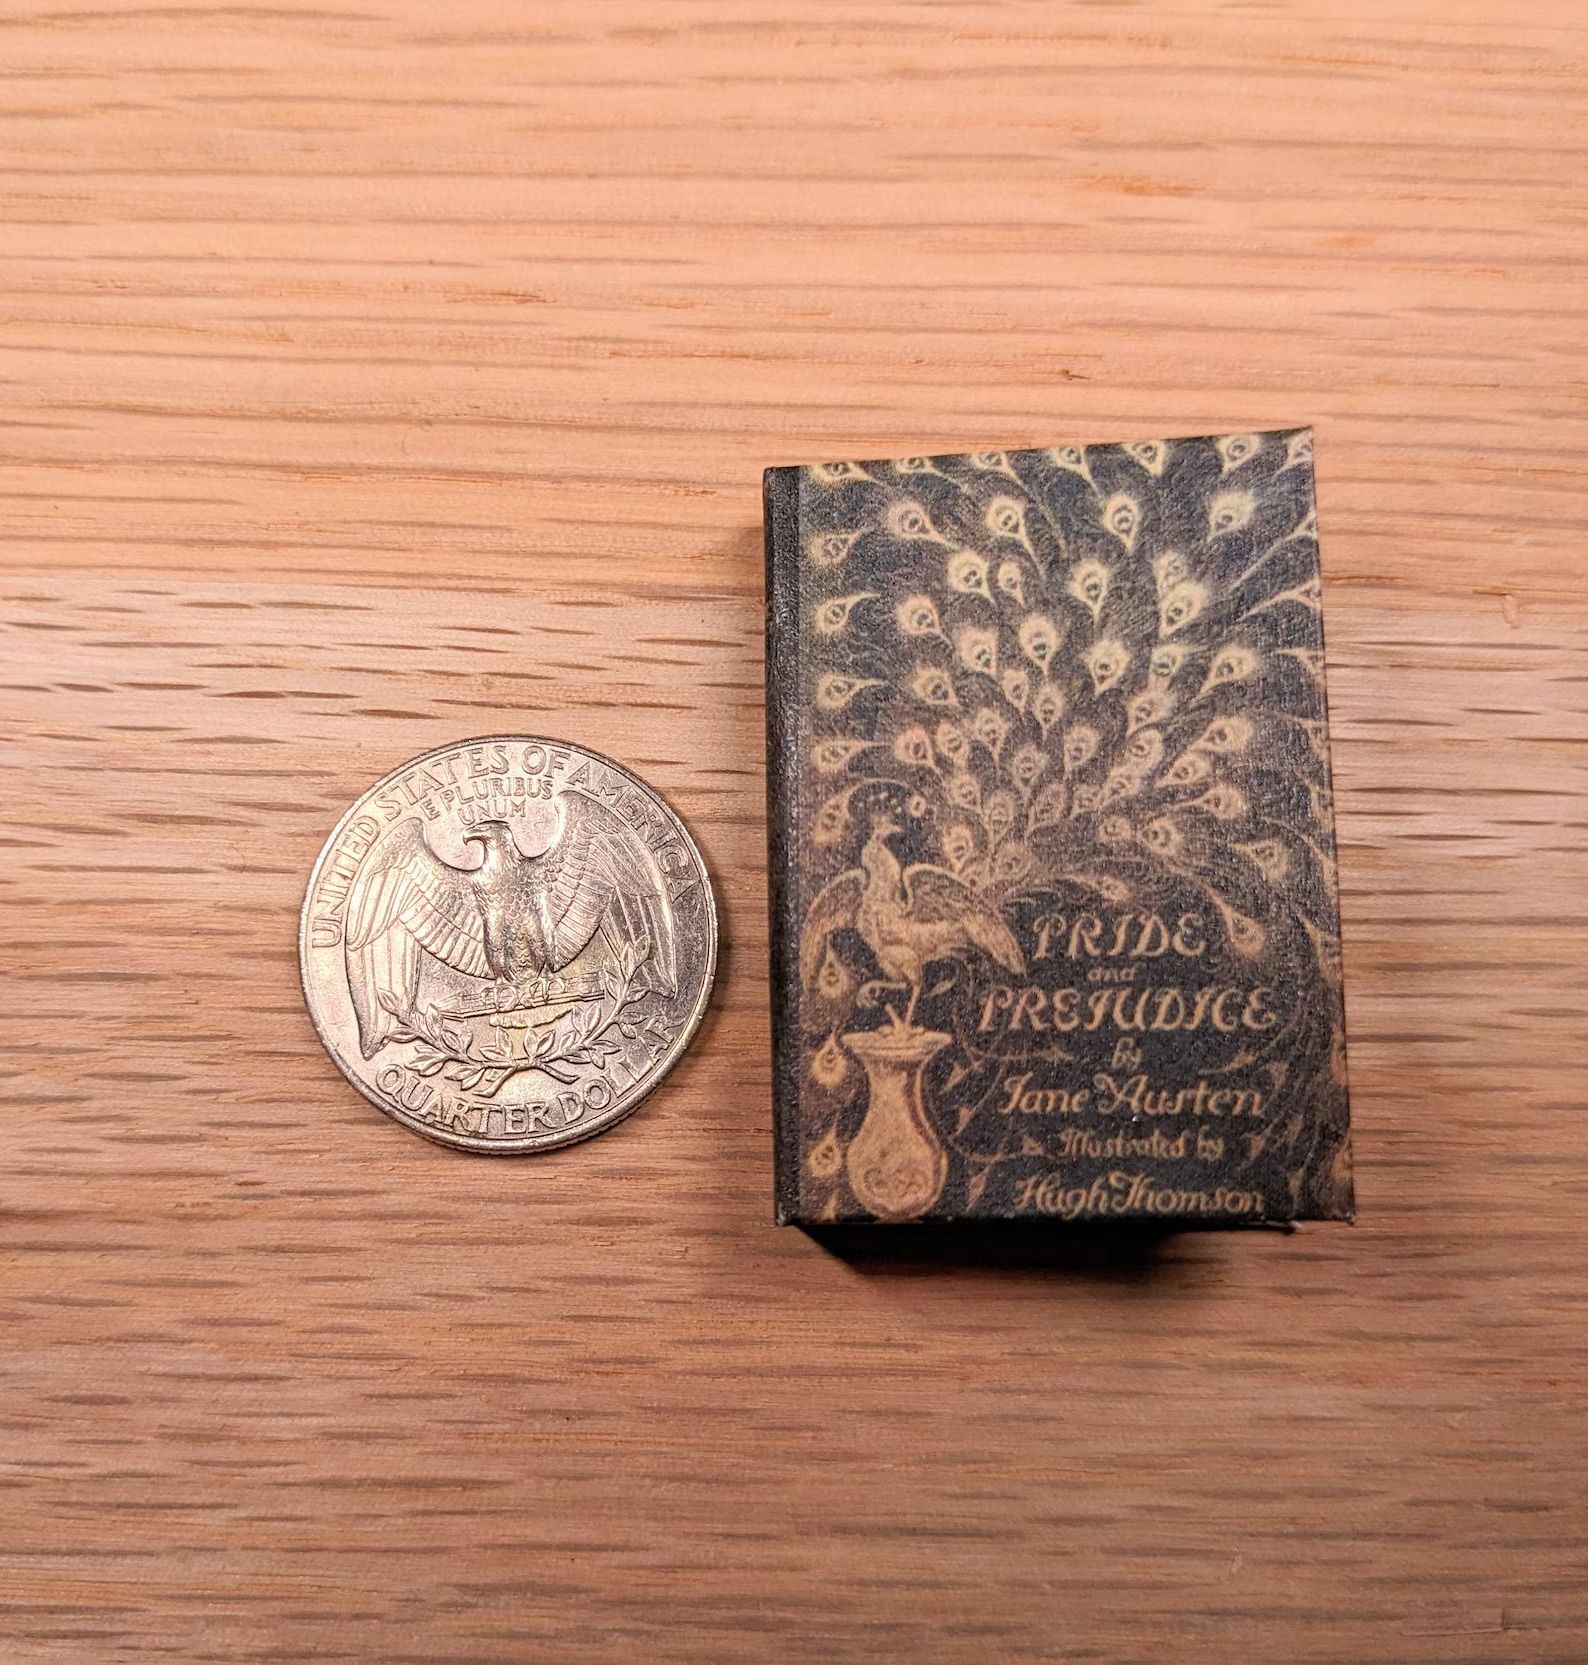 Mini Pride and Prejudice Hardcover next to an American quarter for size refrence.